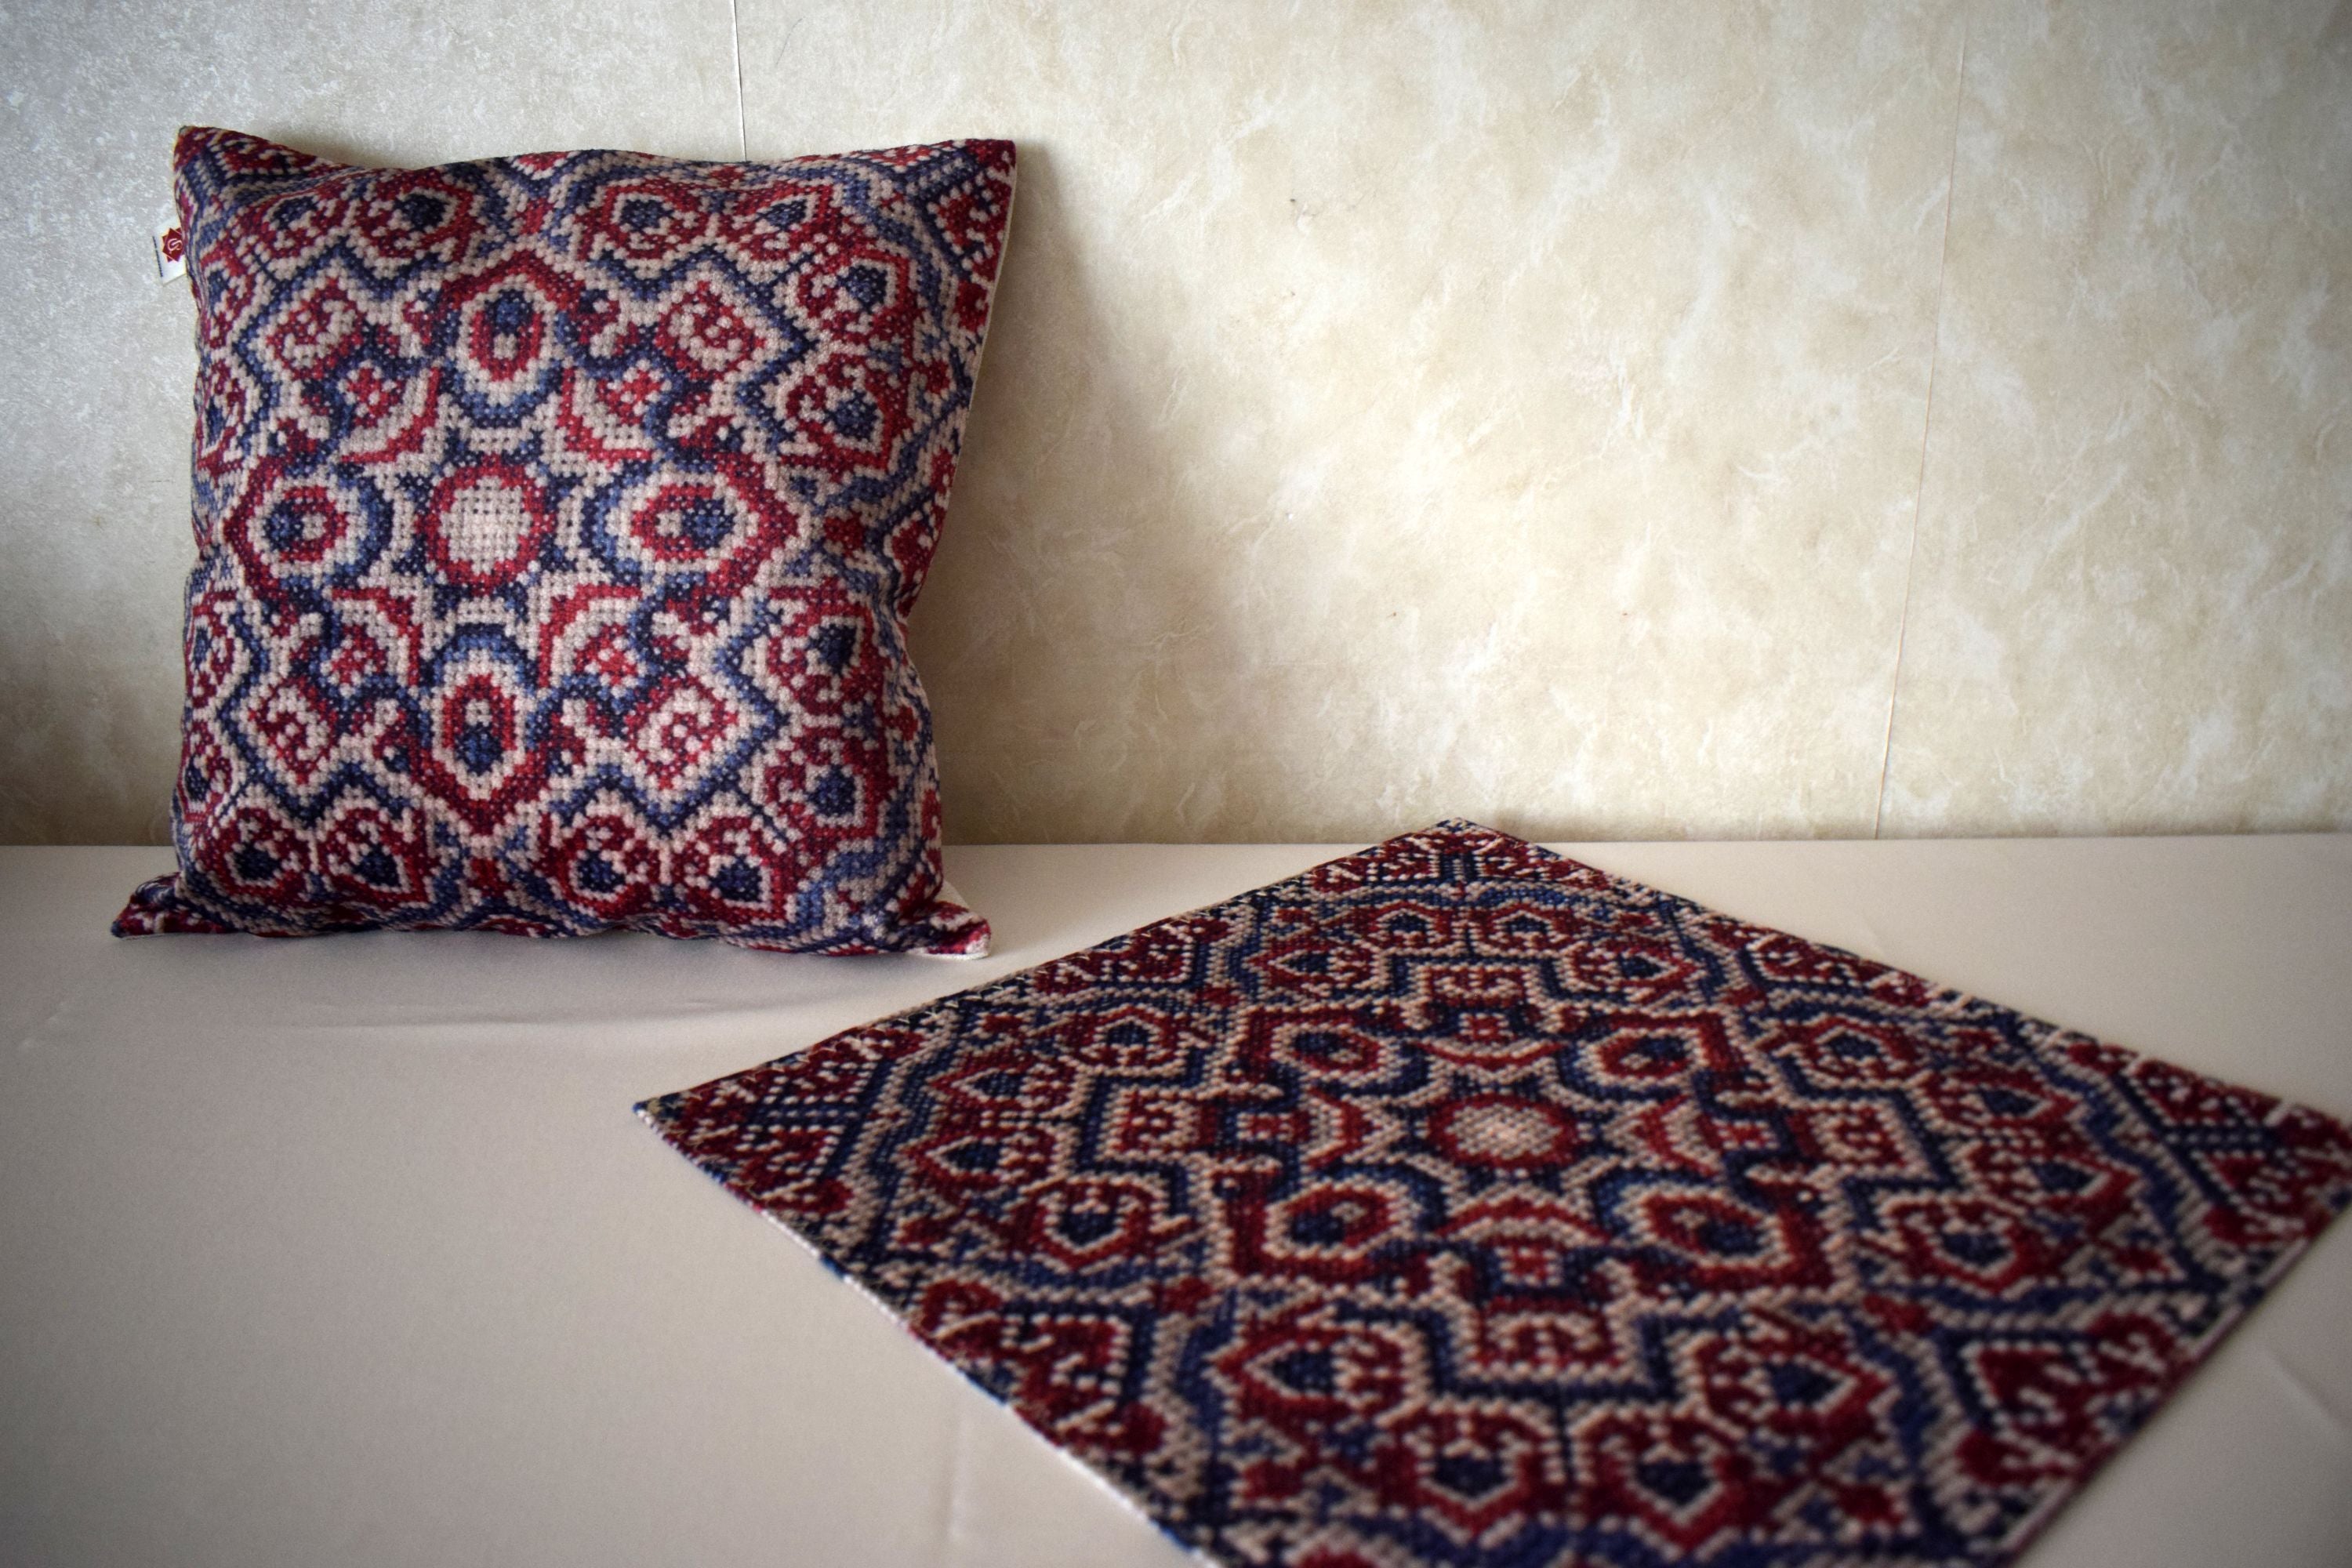 Tablecloth and Pillowcase with Armenian Ornaments